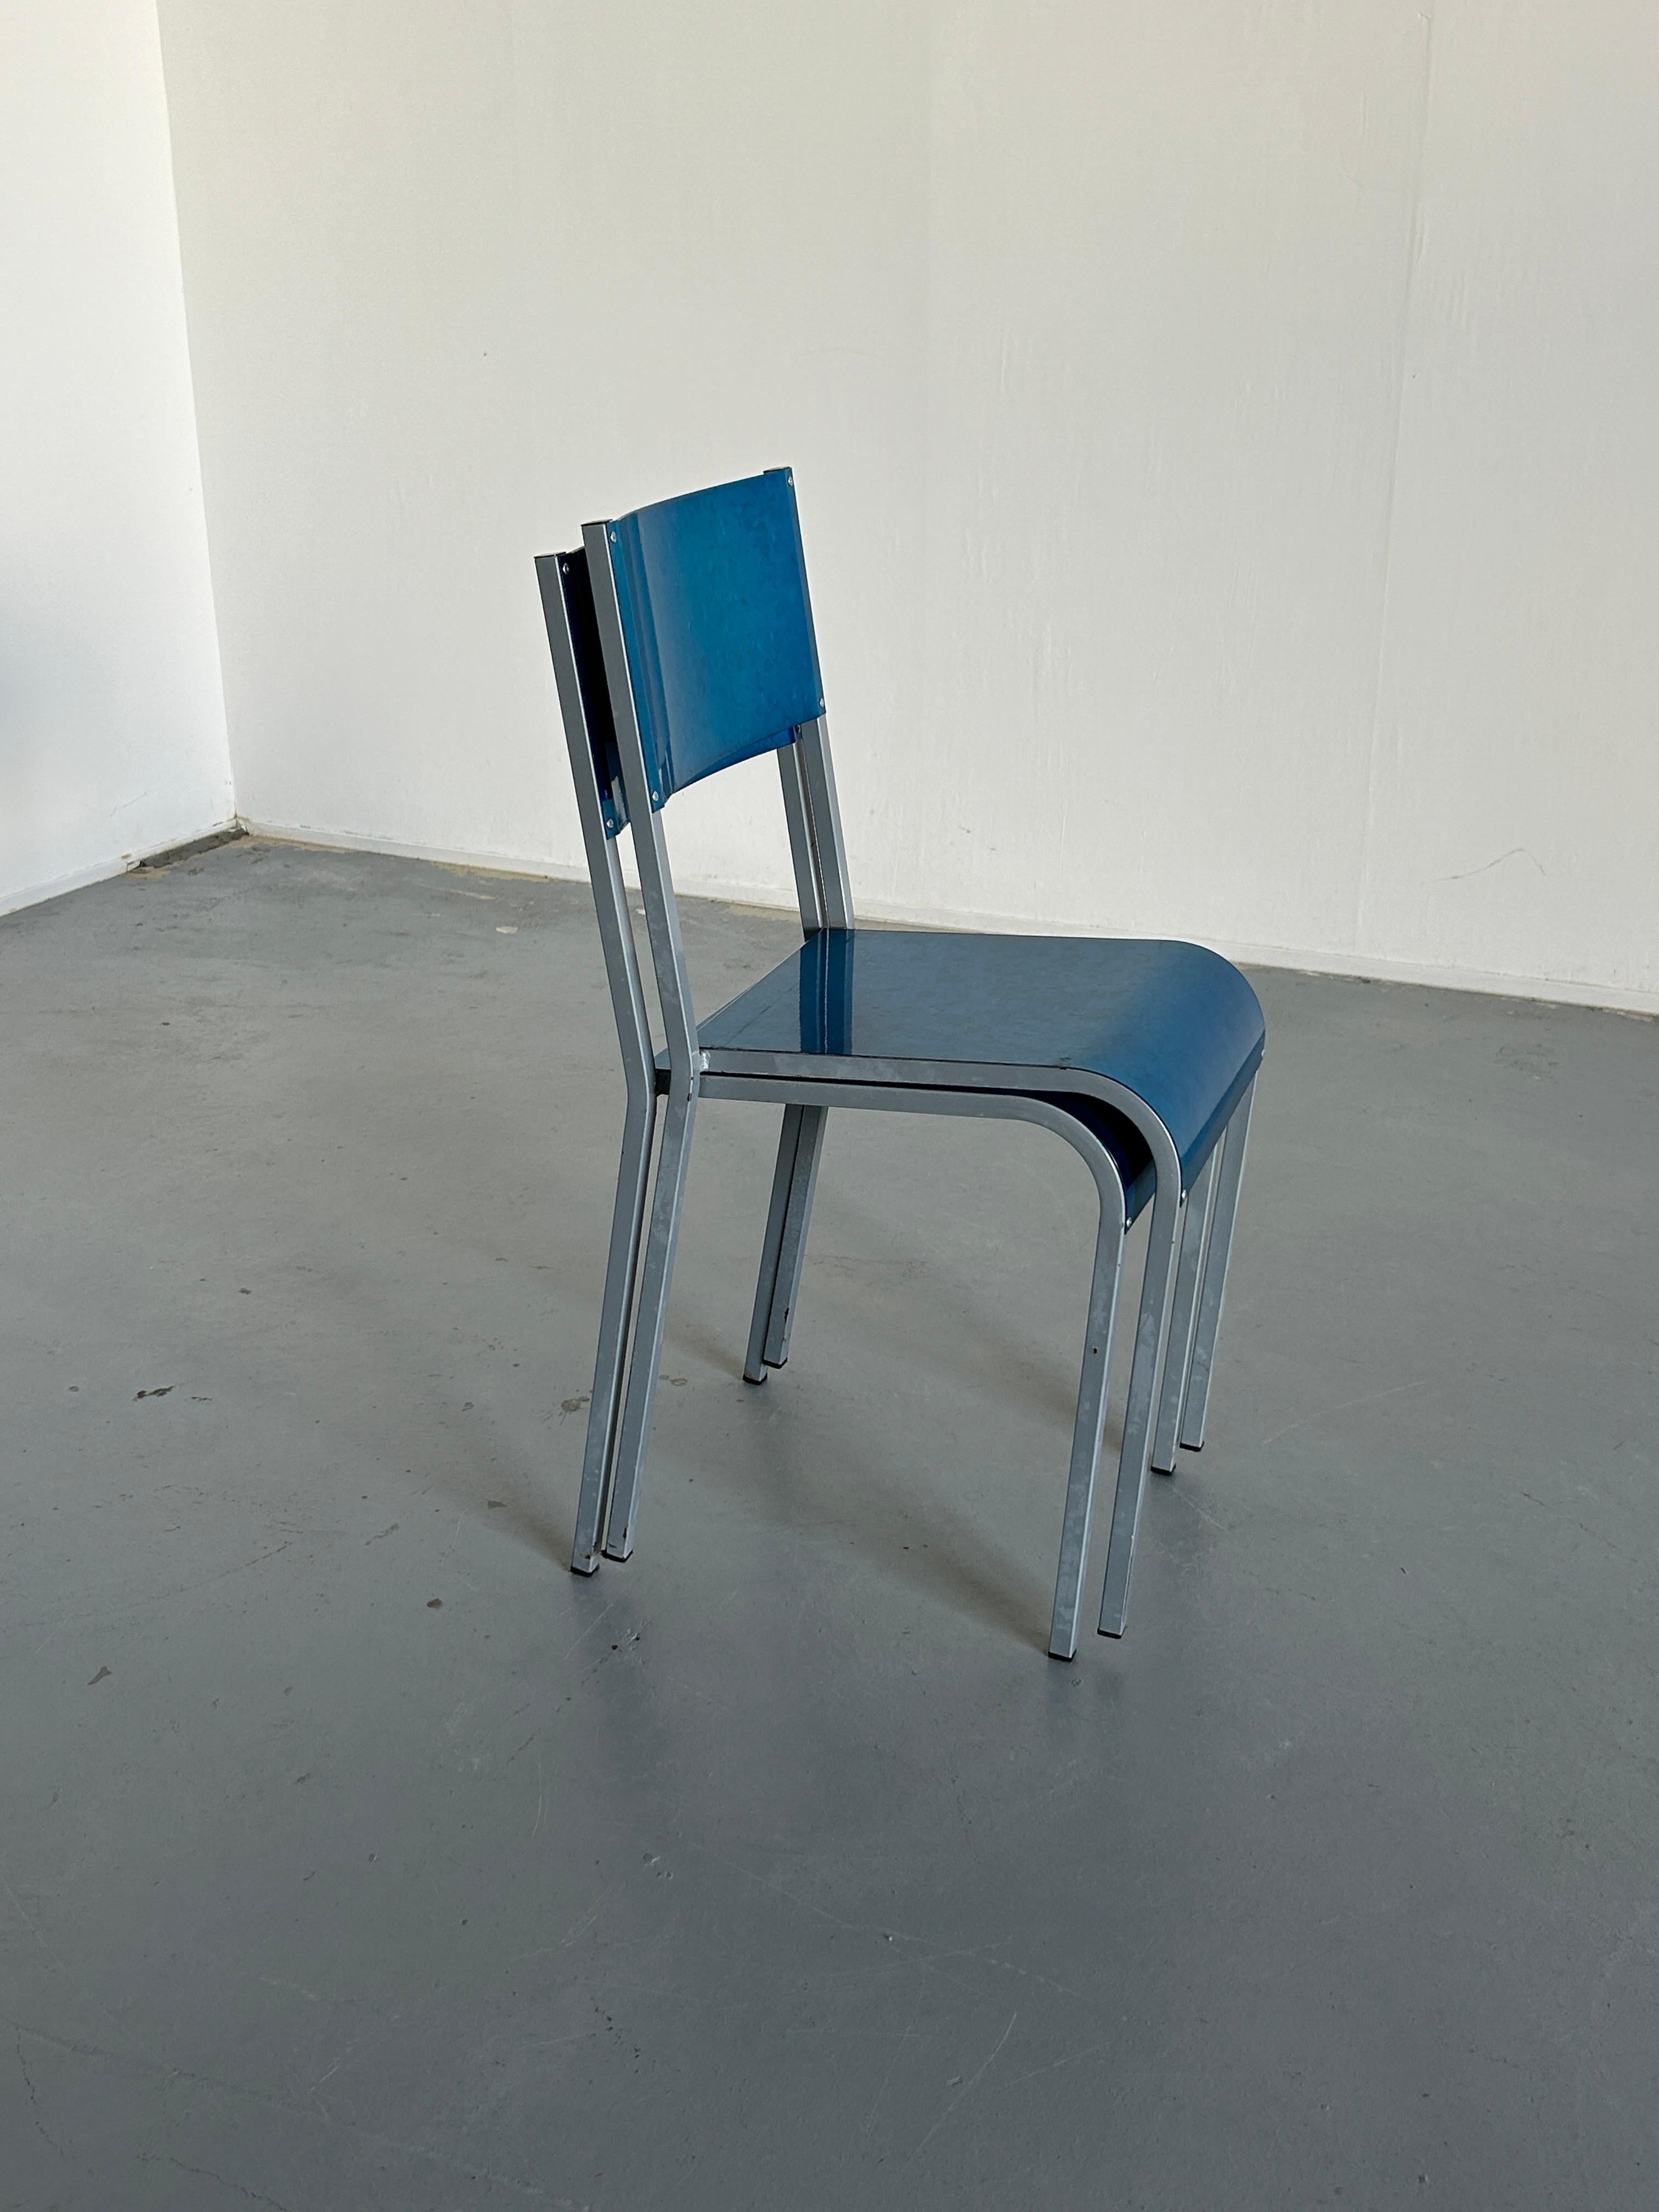 Pair of Blue Postmodern Industrial Metal Dining Chairs by Parisotto, 1980s Italy For Sale 1